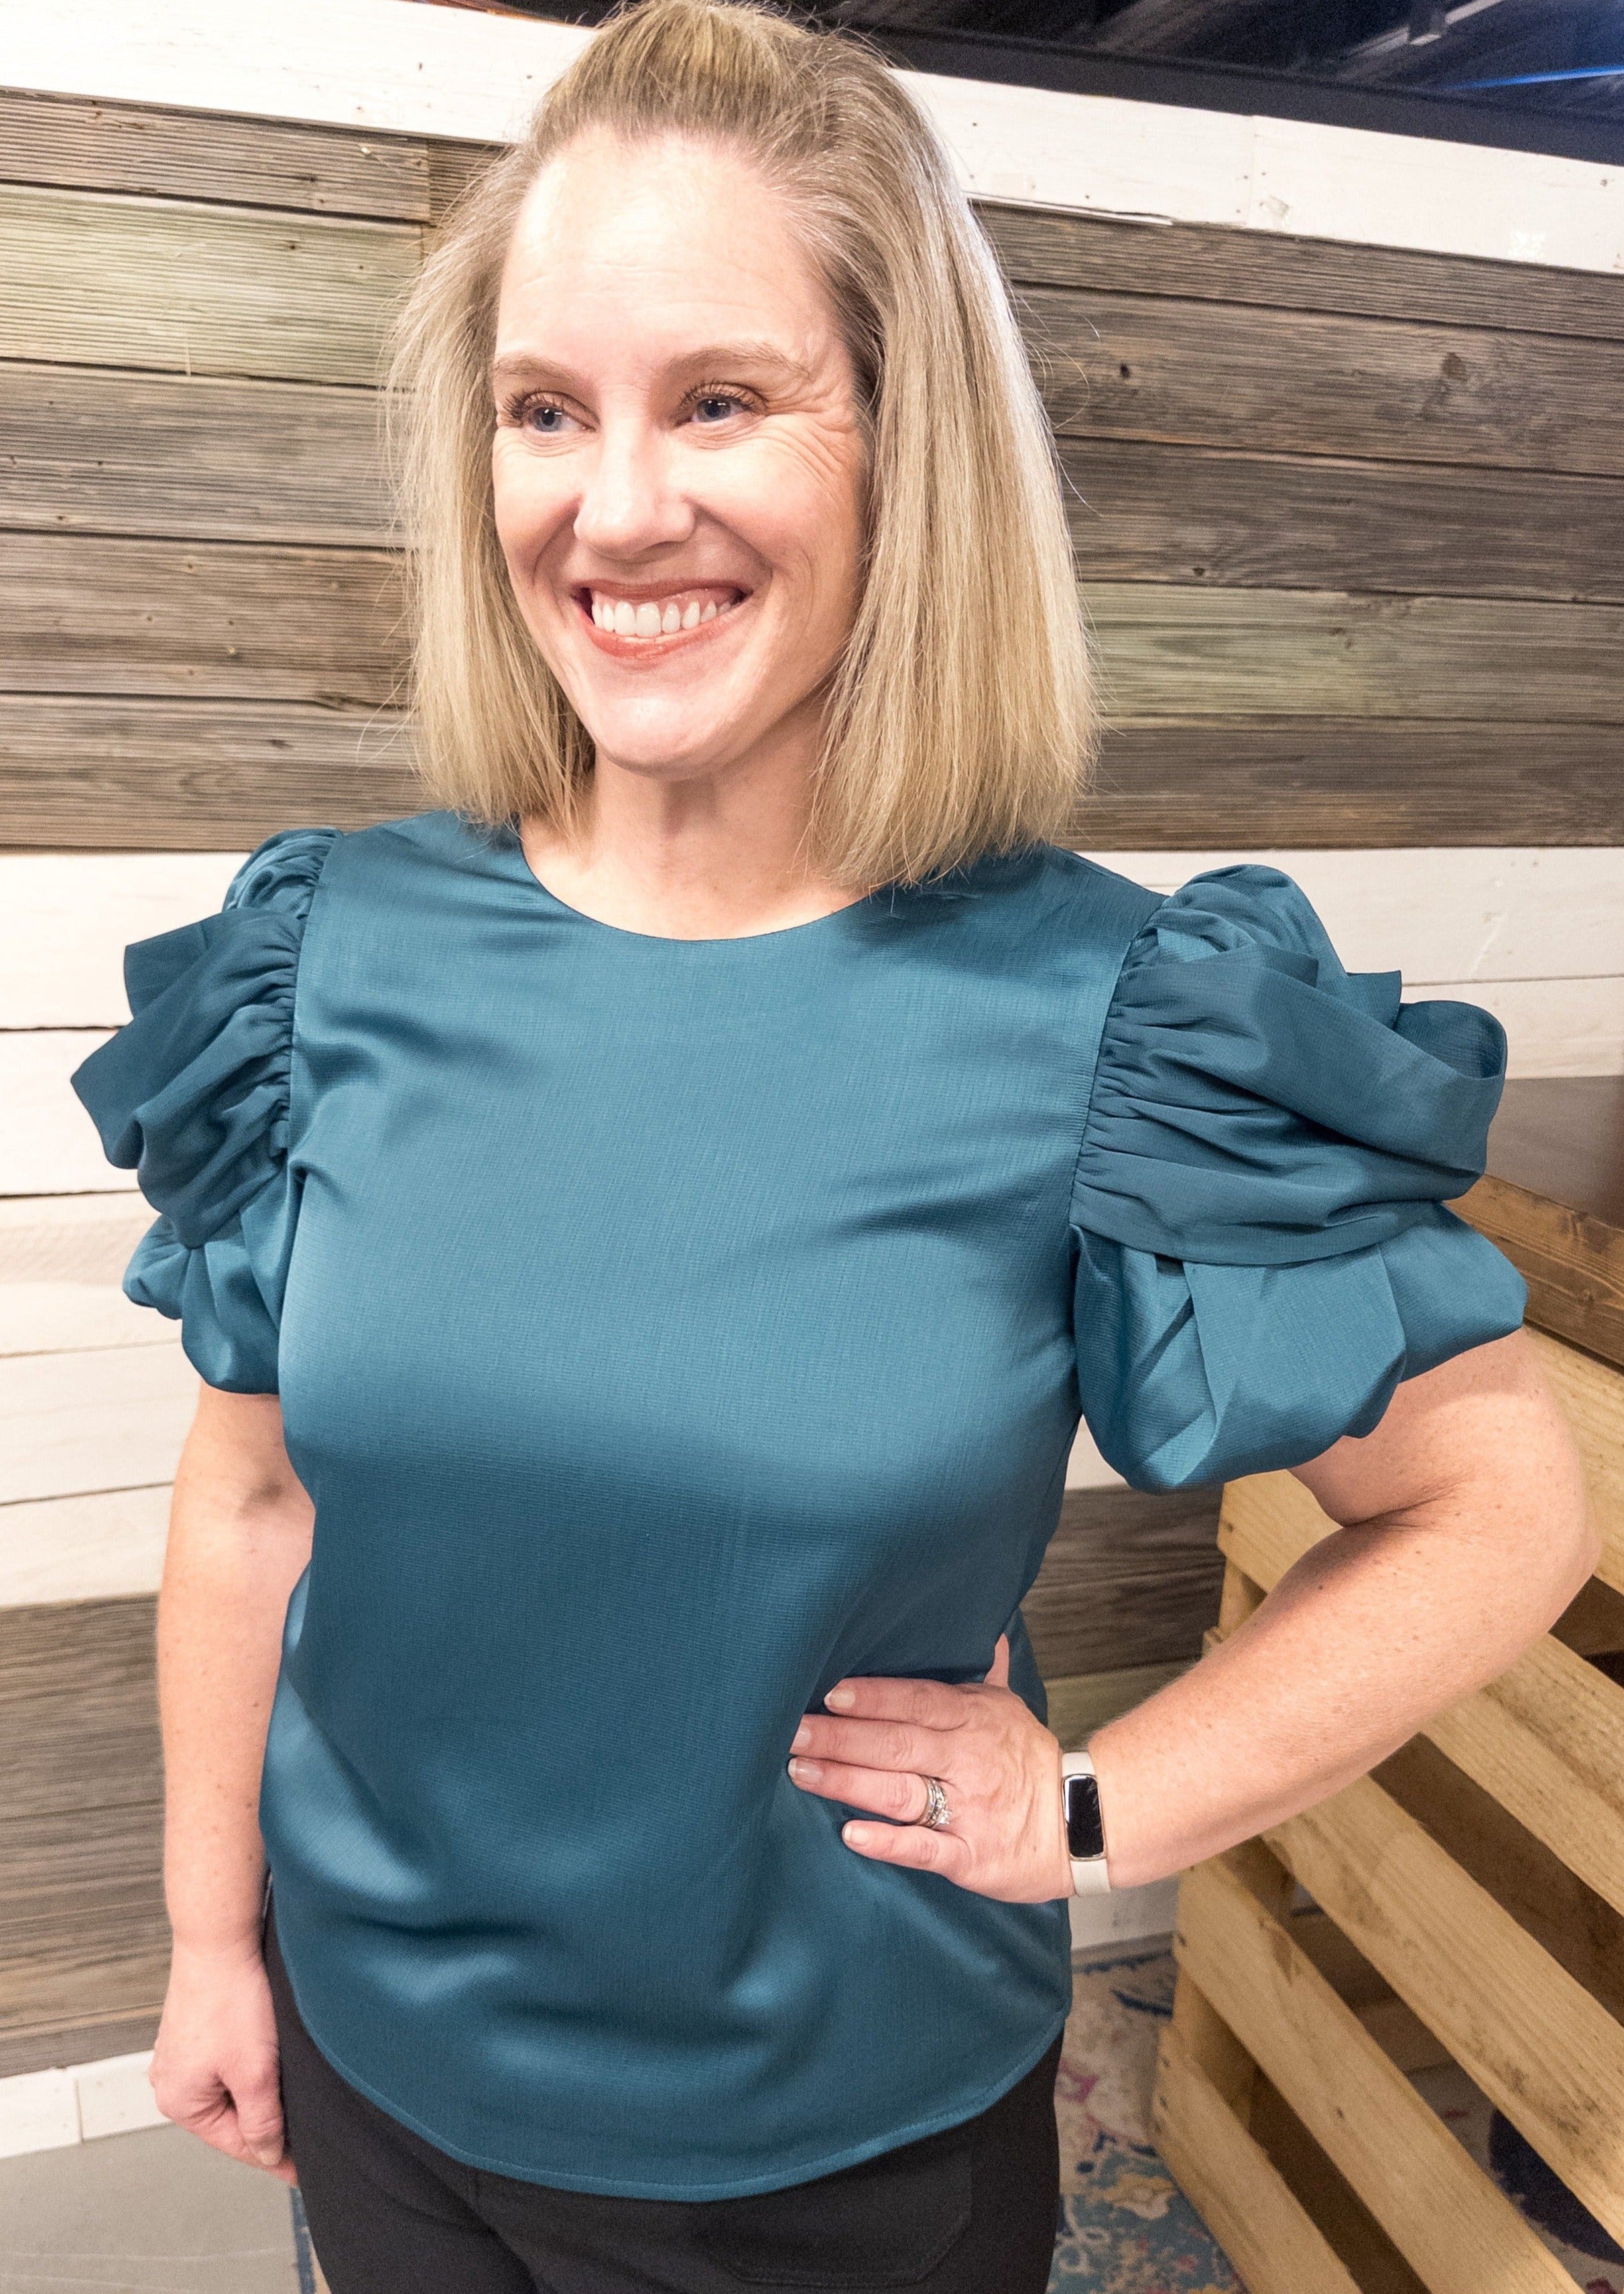 Solid teal colored top with a big and fun draped sleeve detail.